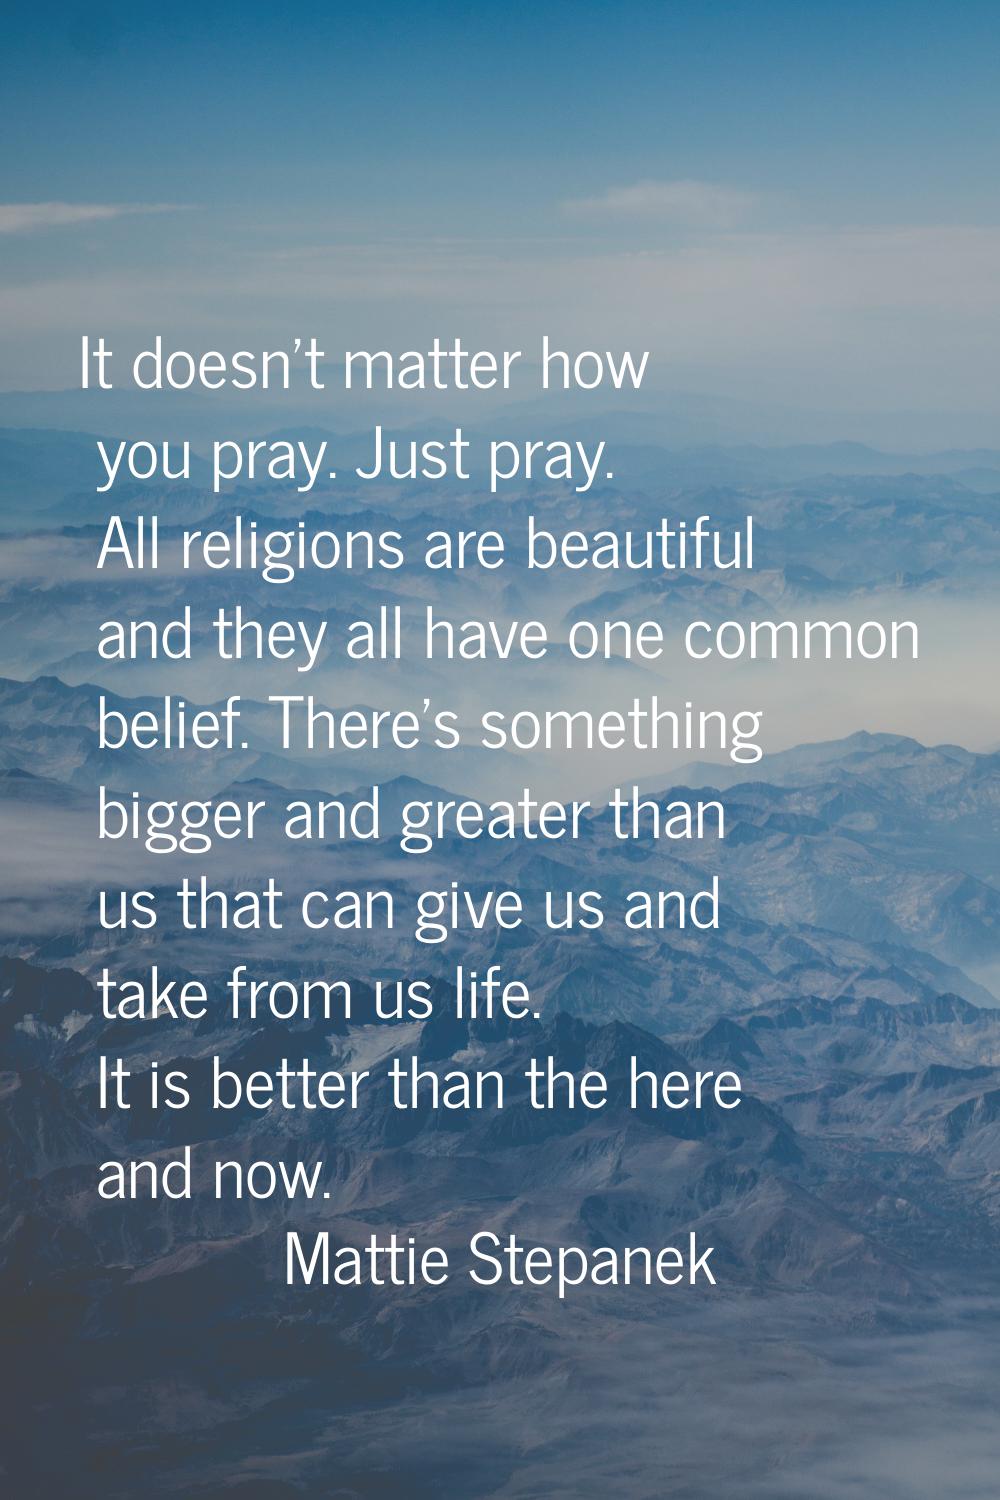 It doesn't matter how you pray. Just pray. All religions are beautiful and they all have one common